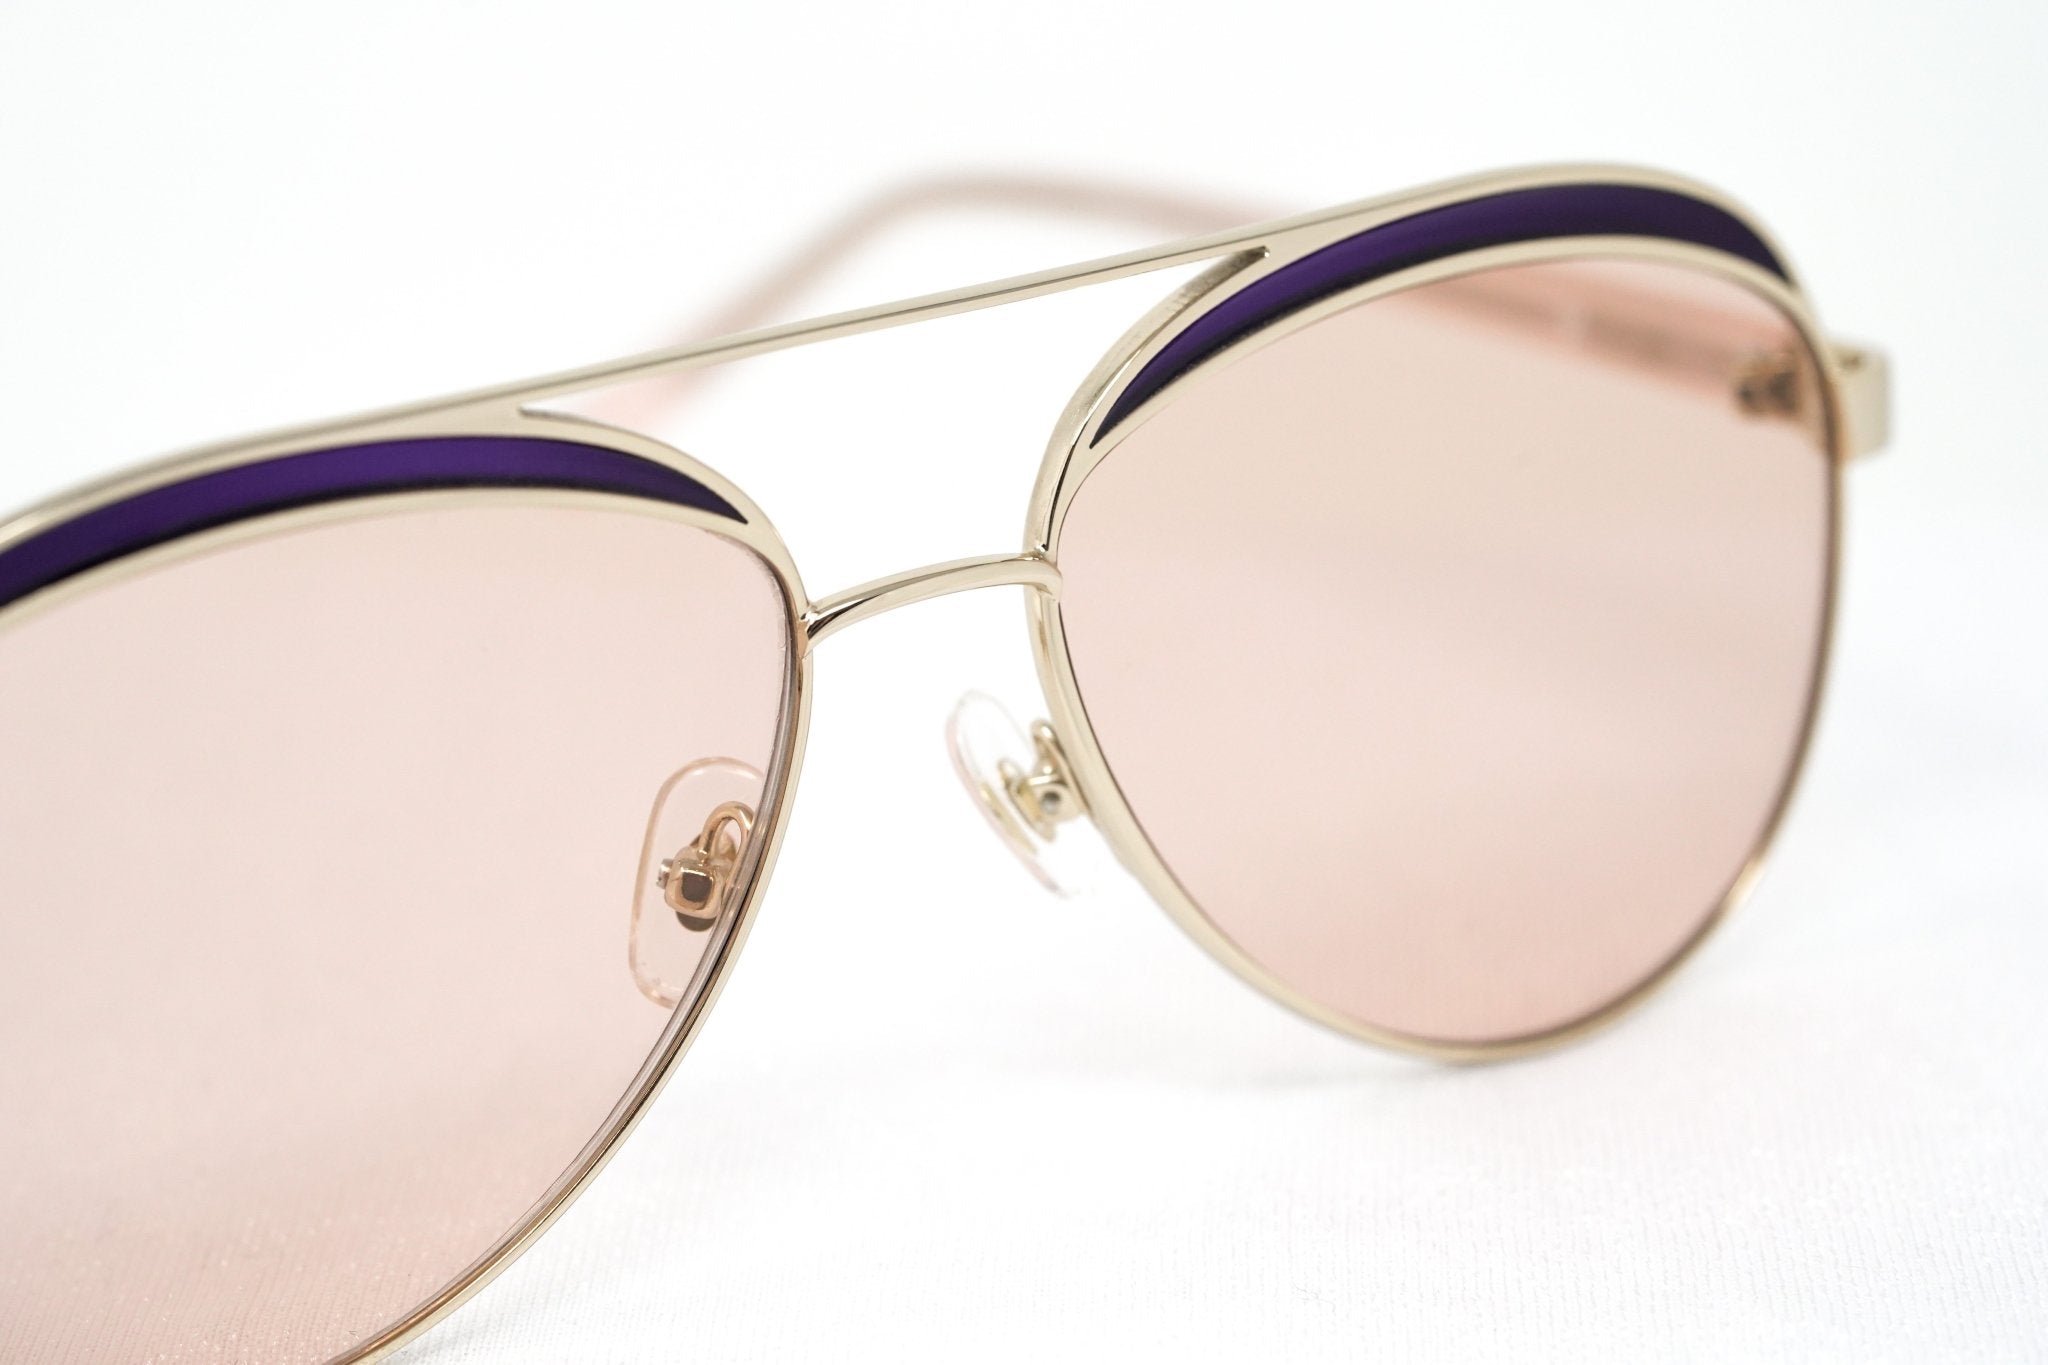 NO 21 Women's Sunglasses Rose Gold and Peach - Watches & Crystals